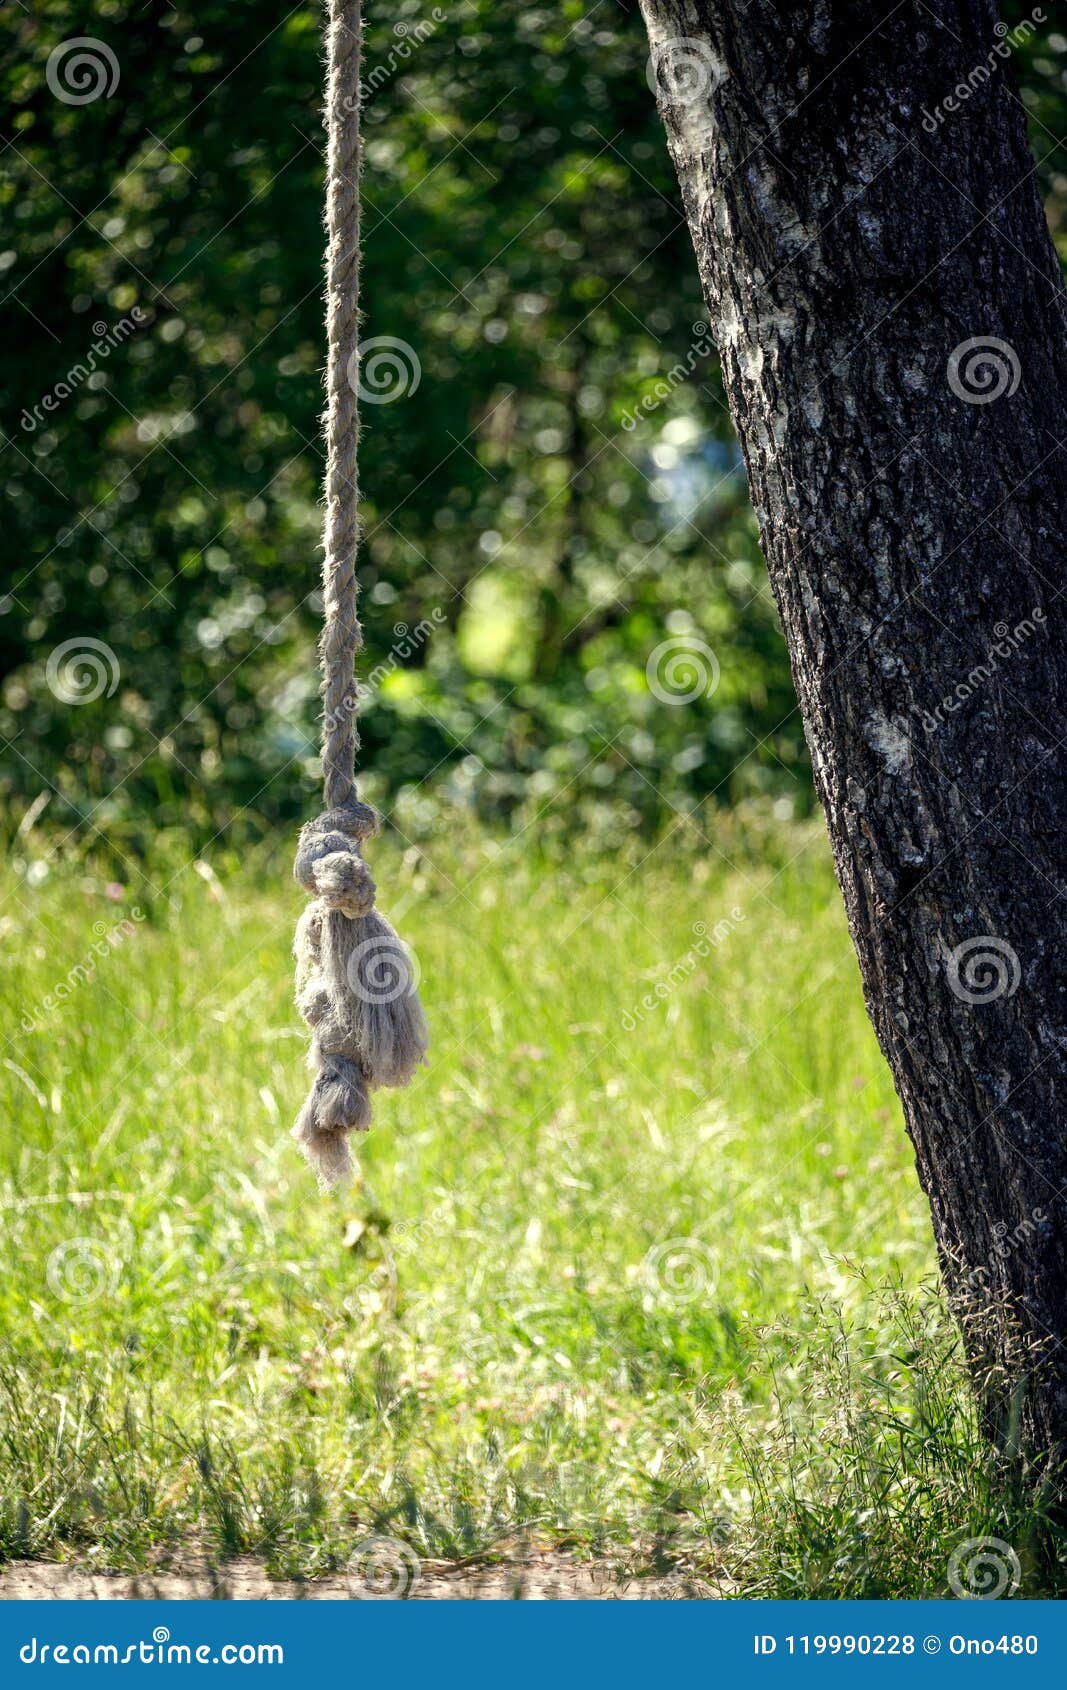 Homemade Swing Rope on a Tree Stock Photo - Image of person, play